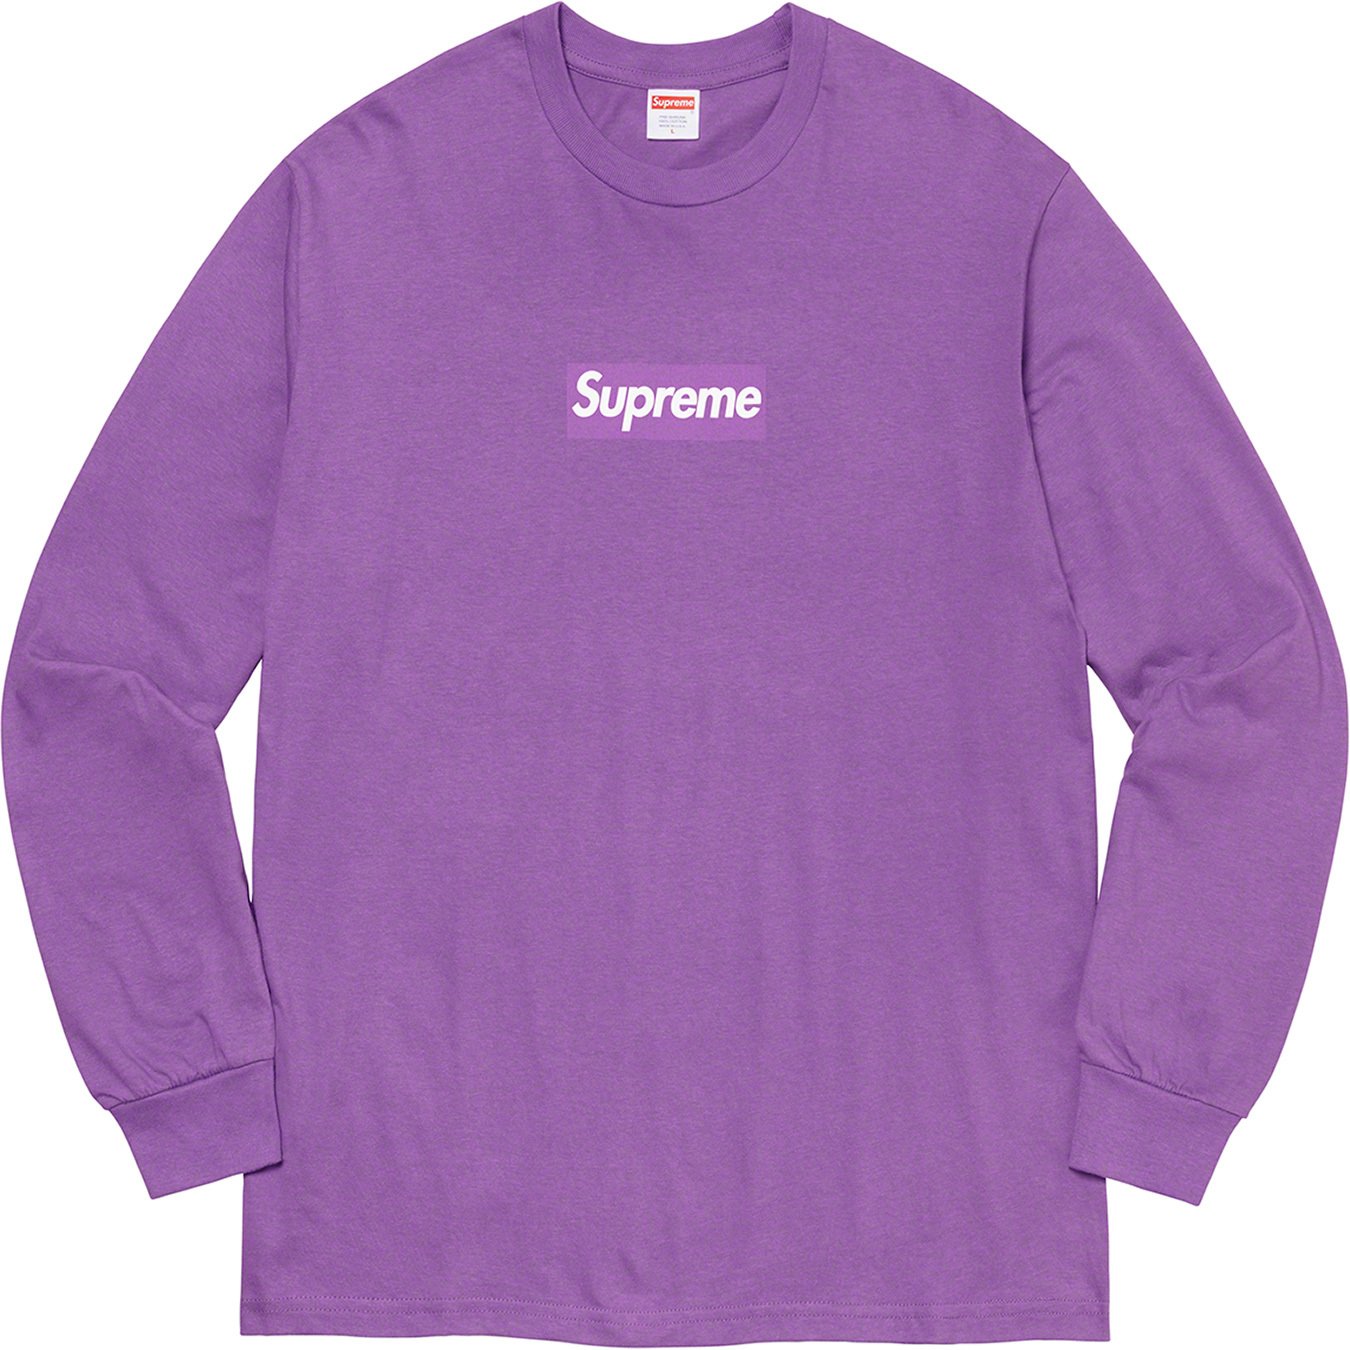 Supreme Unveils Upcoming Fall 2020 Tees Including Long Sleeve Box Logo Tees